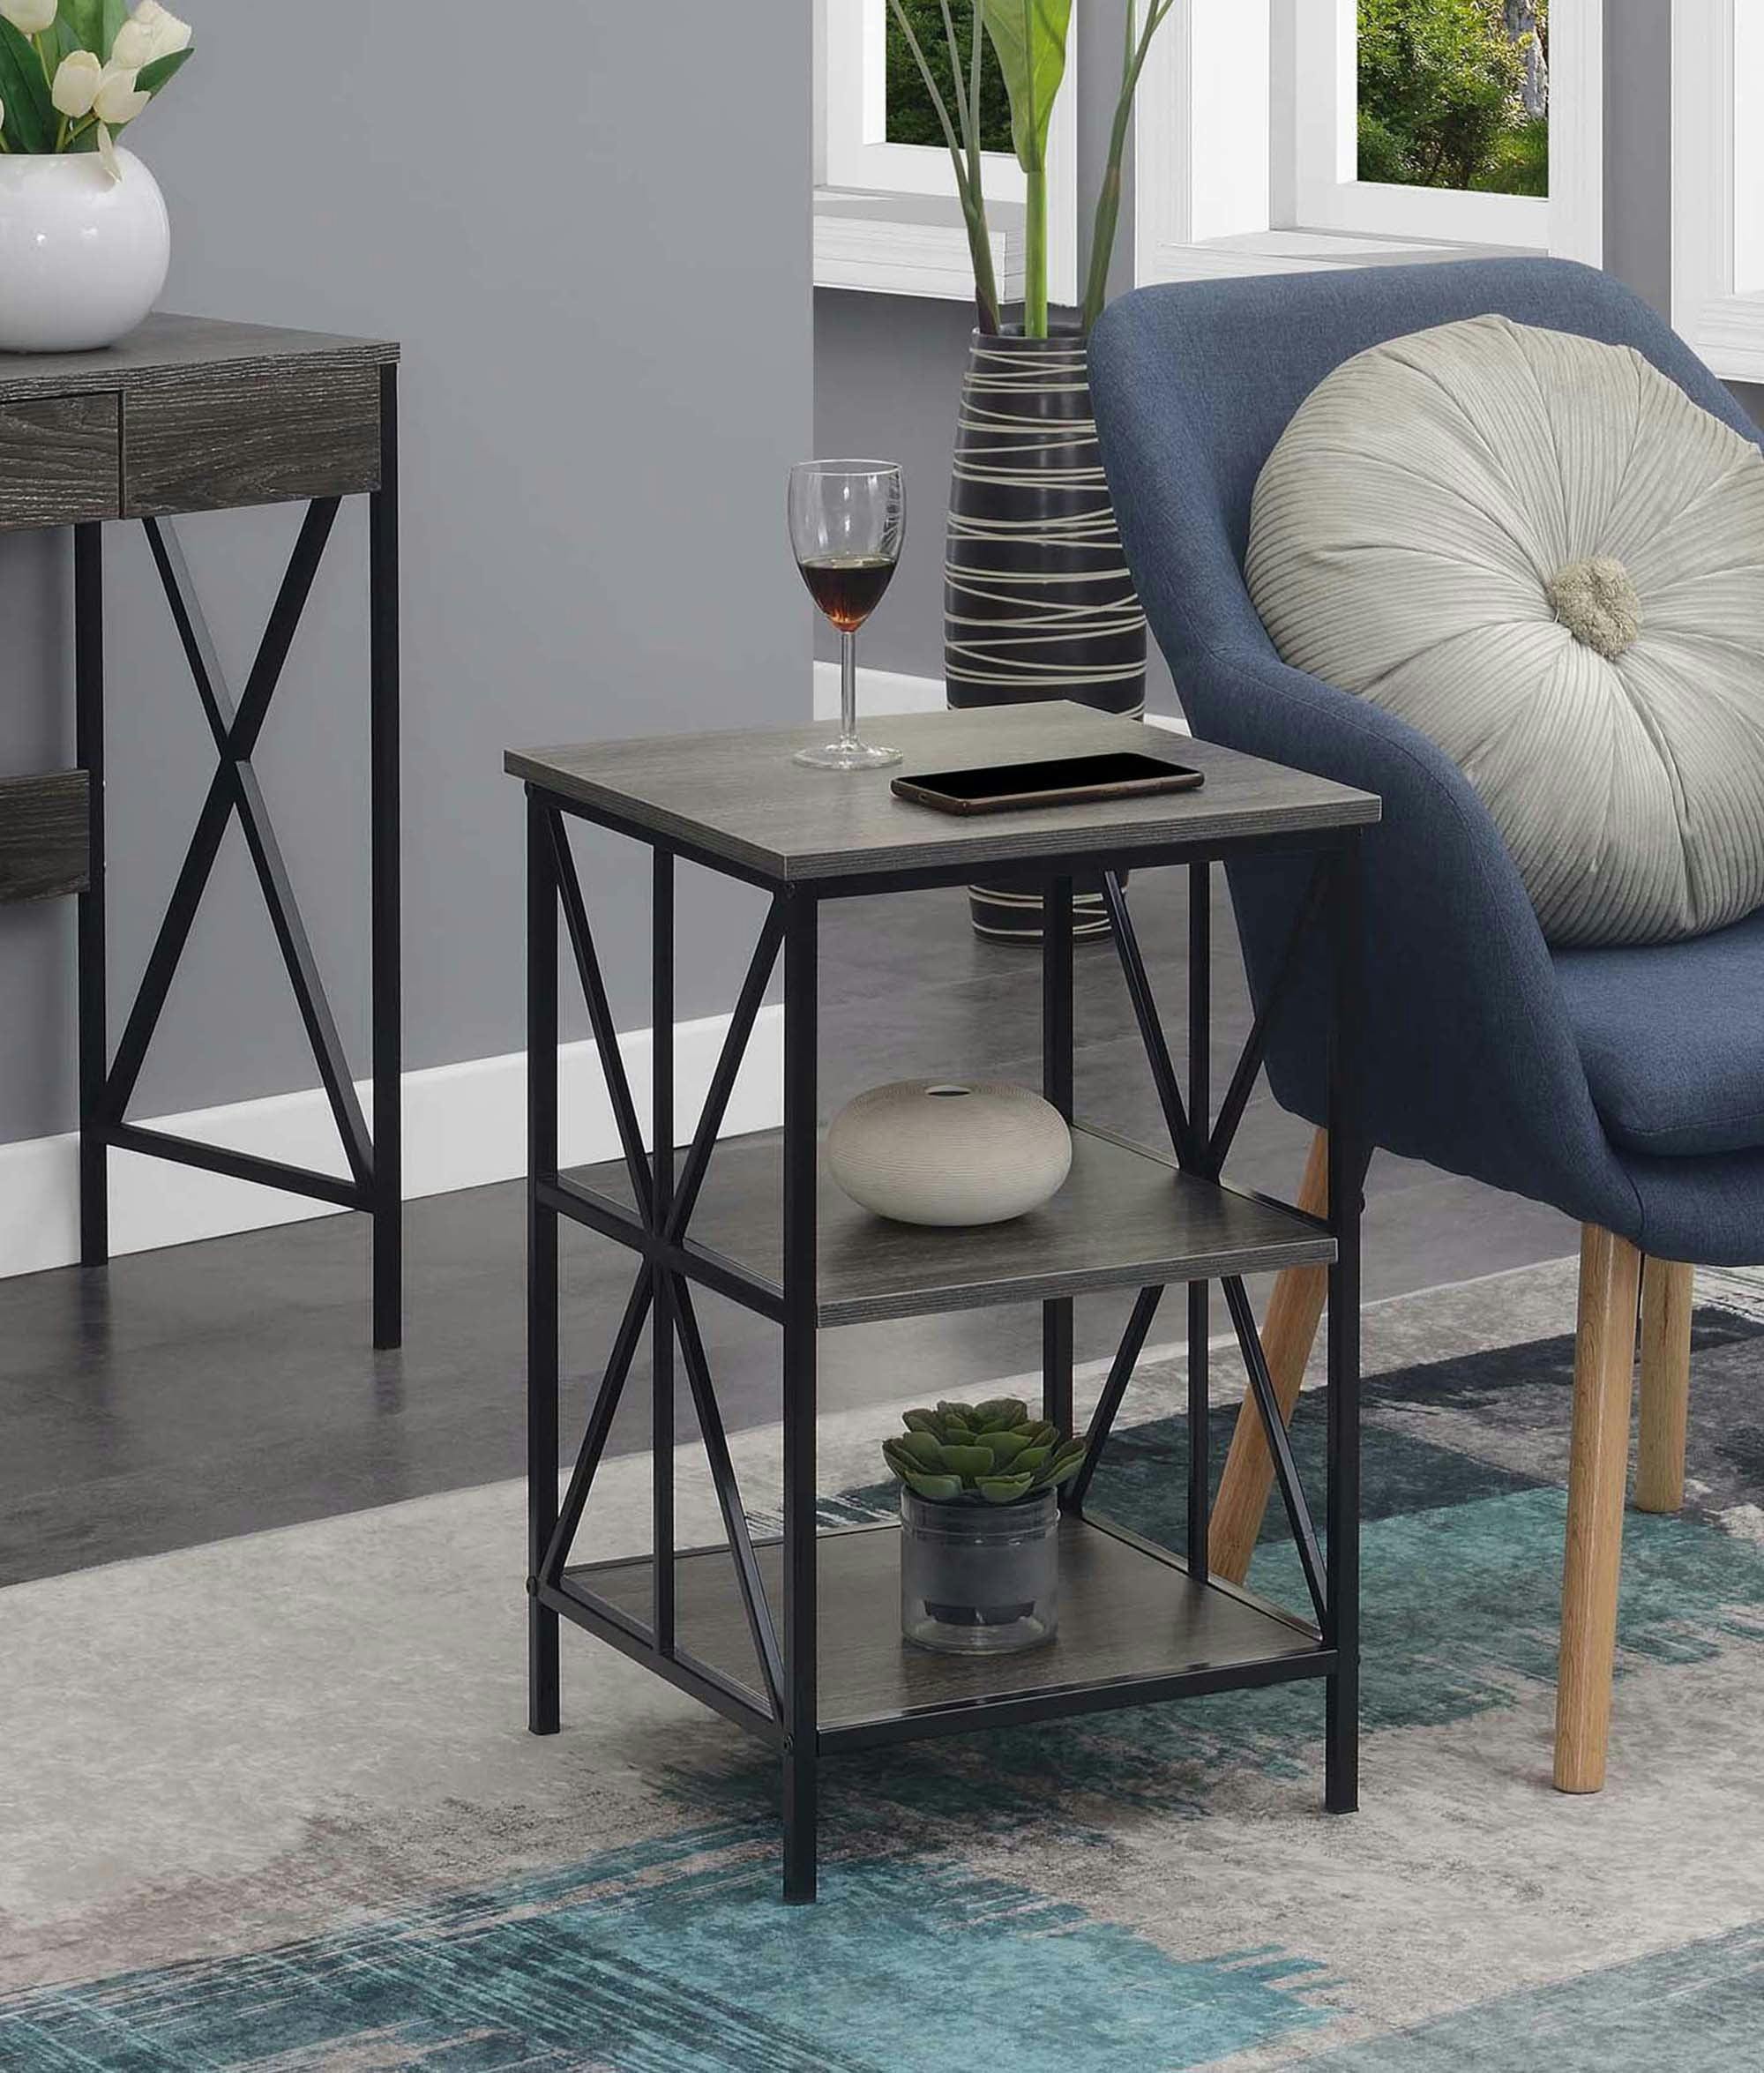 Weathered Gray Starburst 16" Metal & Wood End Table with Shelves